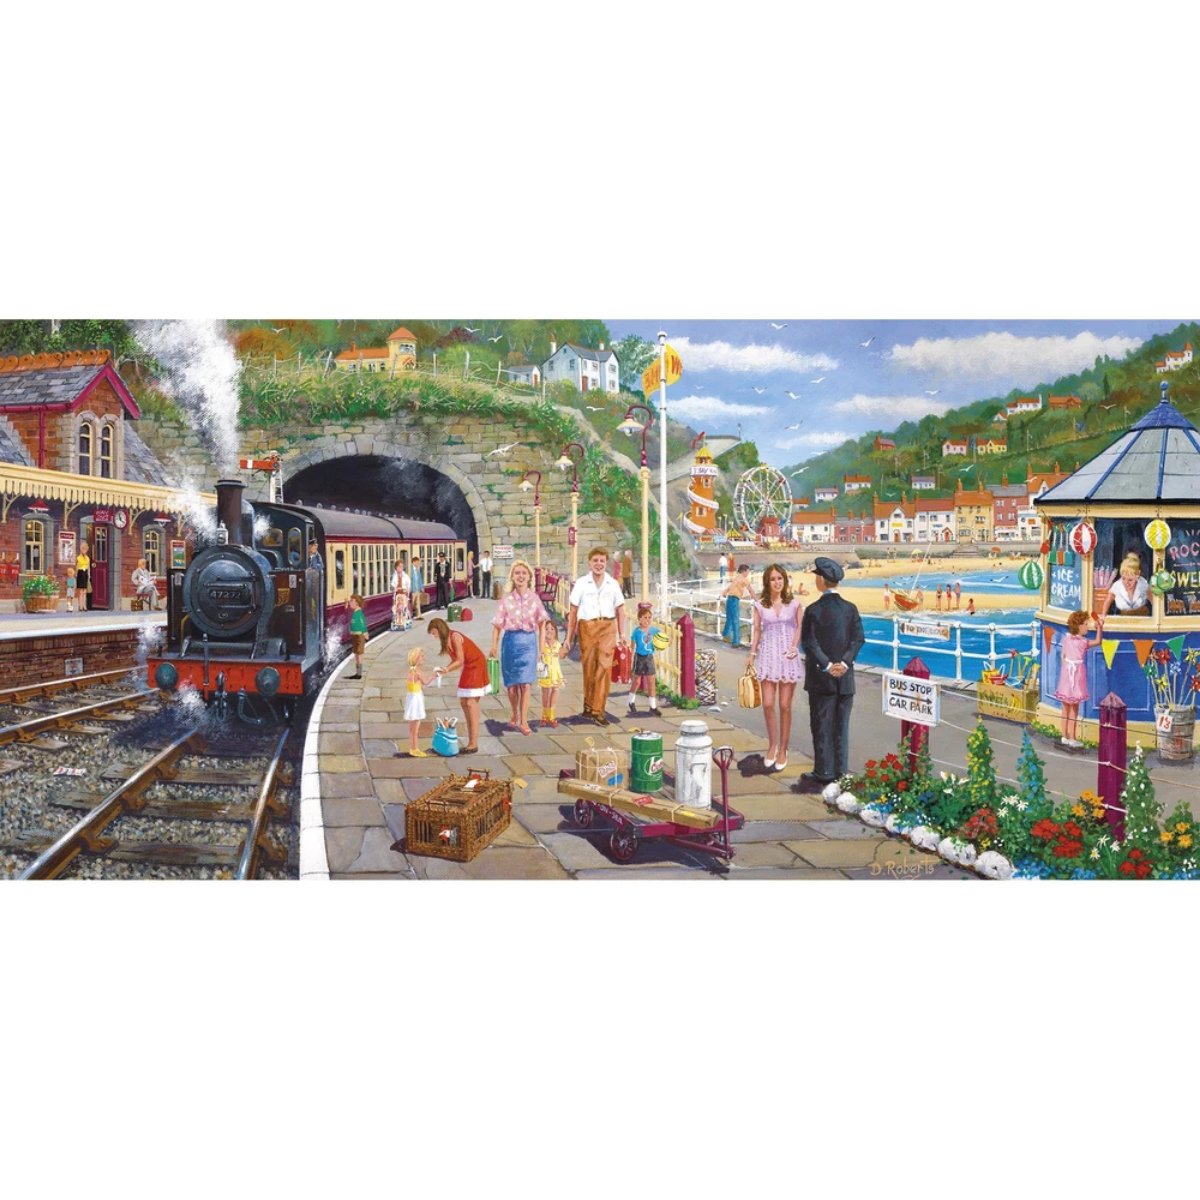 Gibsons Seaside Train Jigsaw Puzzle (636 Pieces)